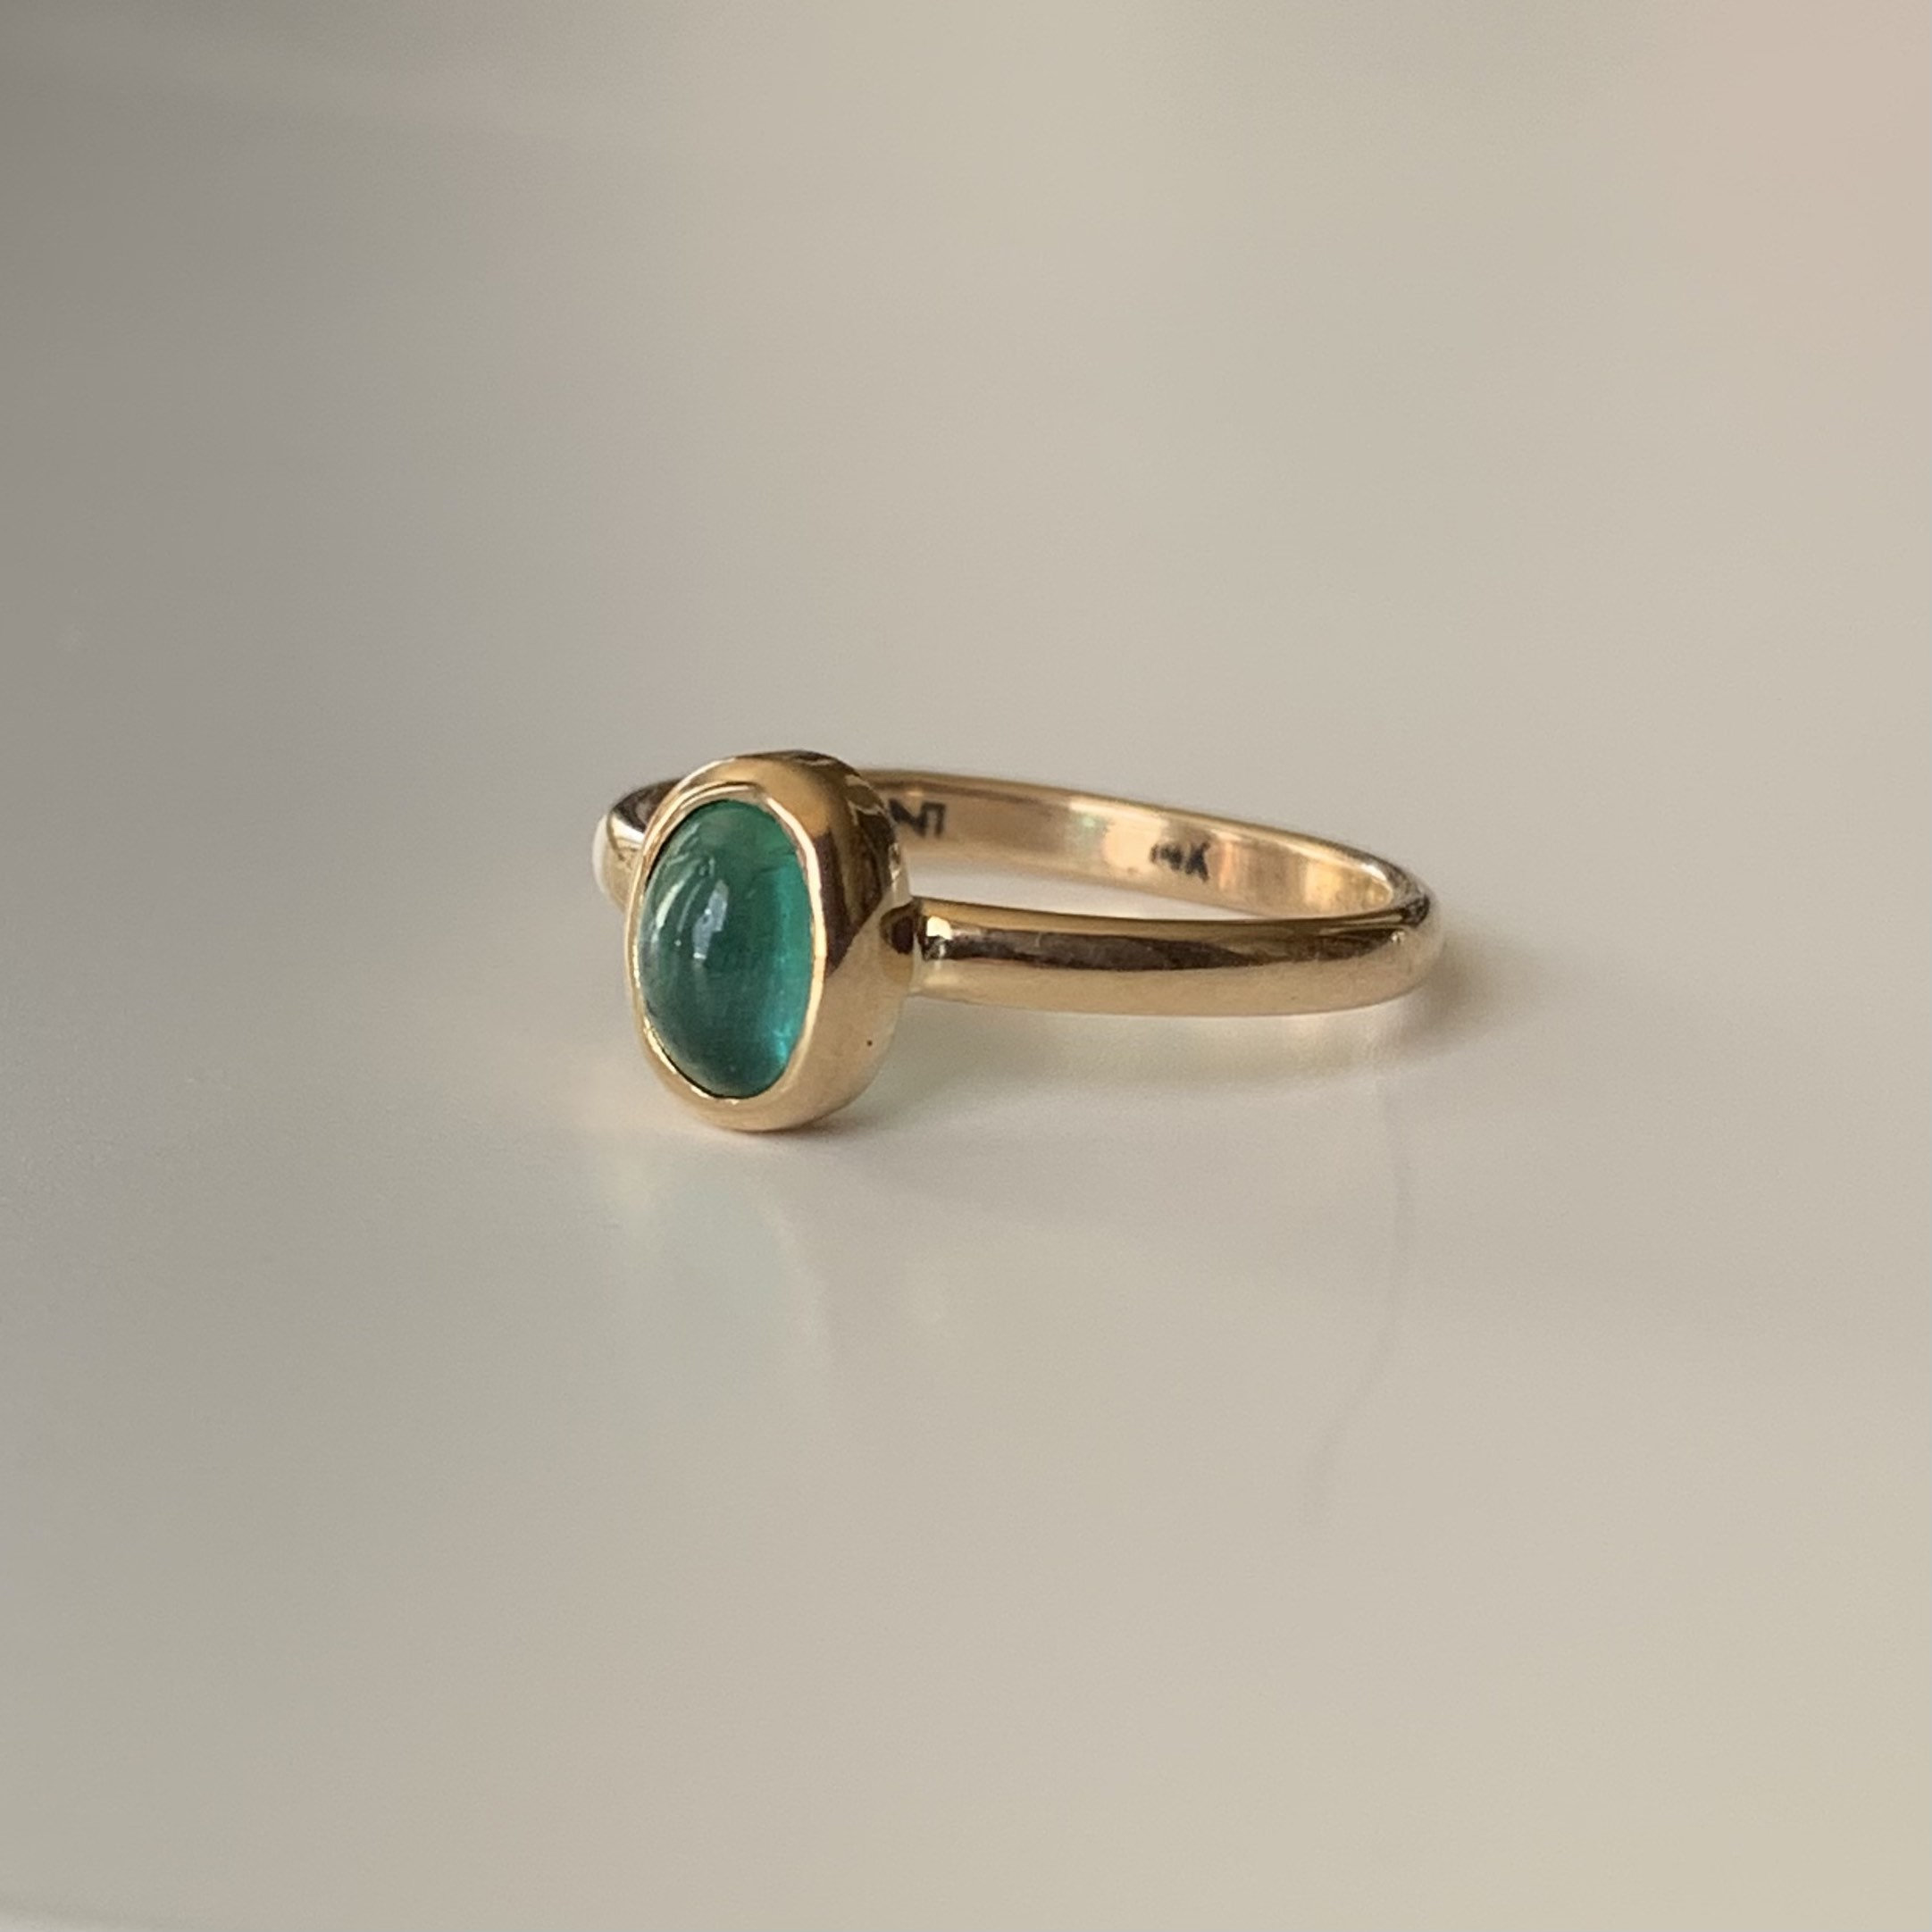 Simple Emerald Ring Recycled Gold and Zambian Emerald Ring. | Etsy